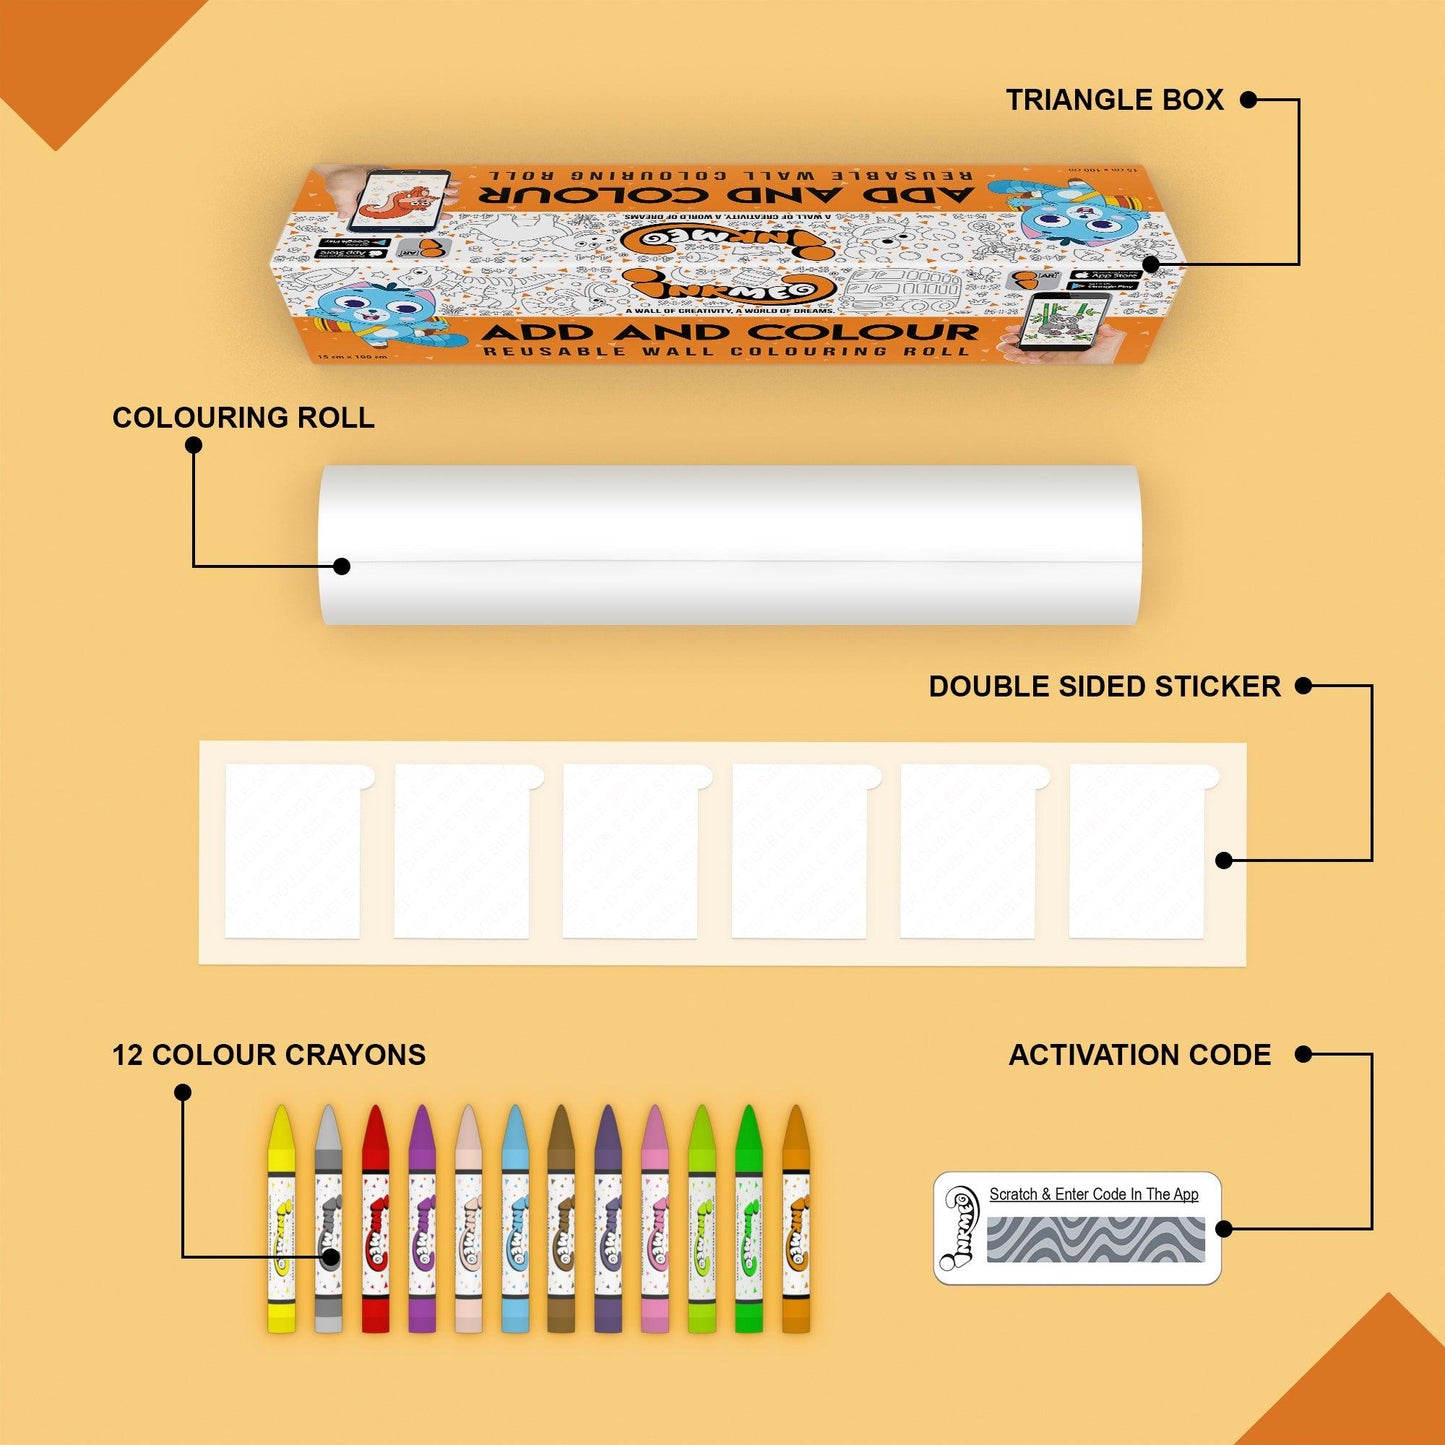 The image depicts an orange background with a single triangular box, a coloring roll, 6 double-sided stickers, 12 colored crayons, and an activation code.